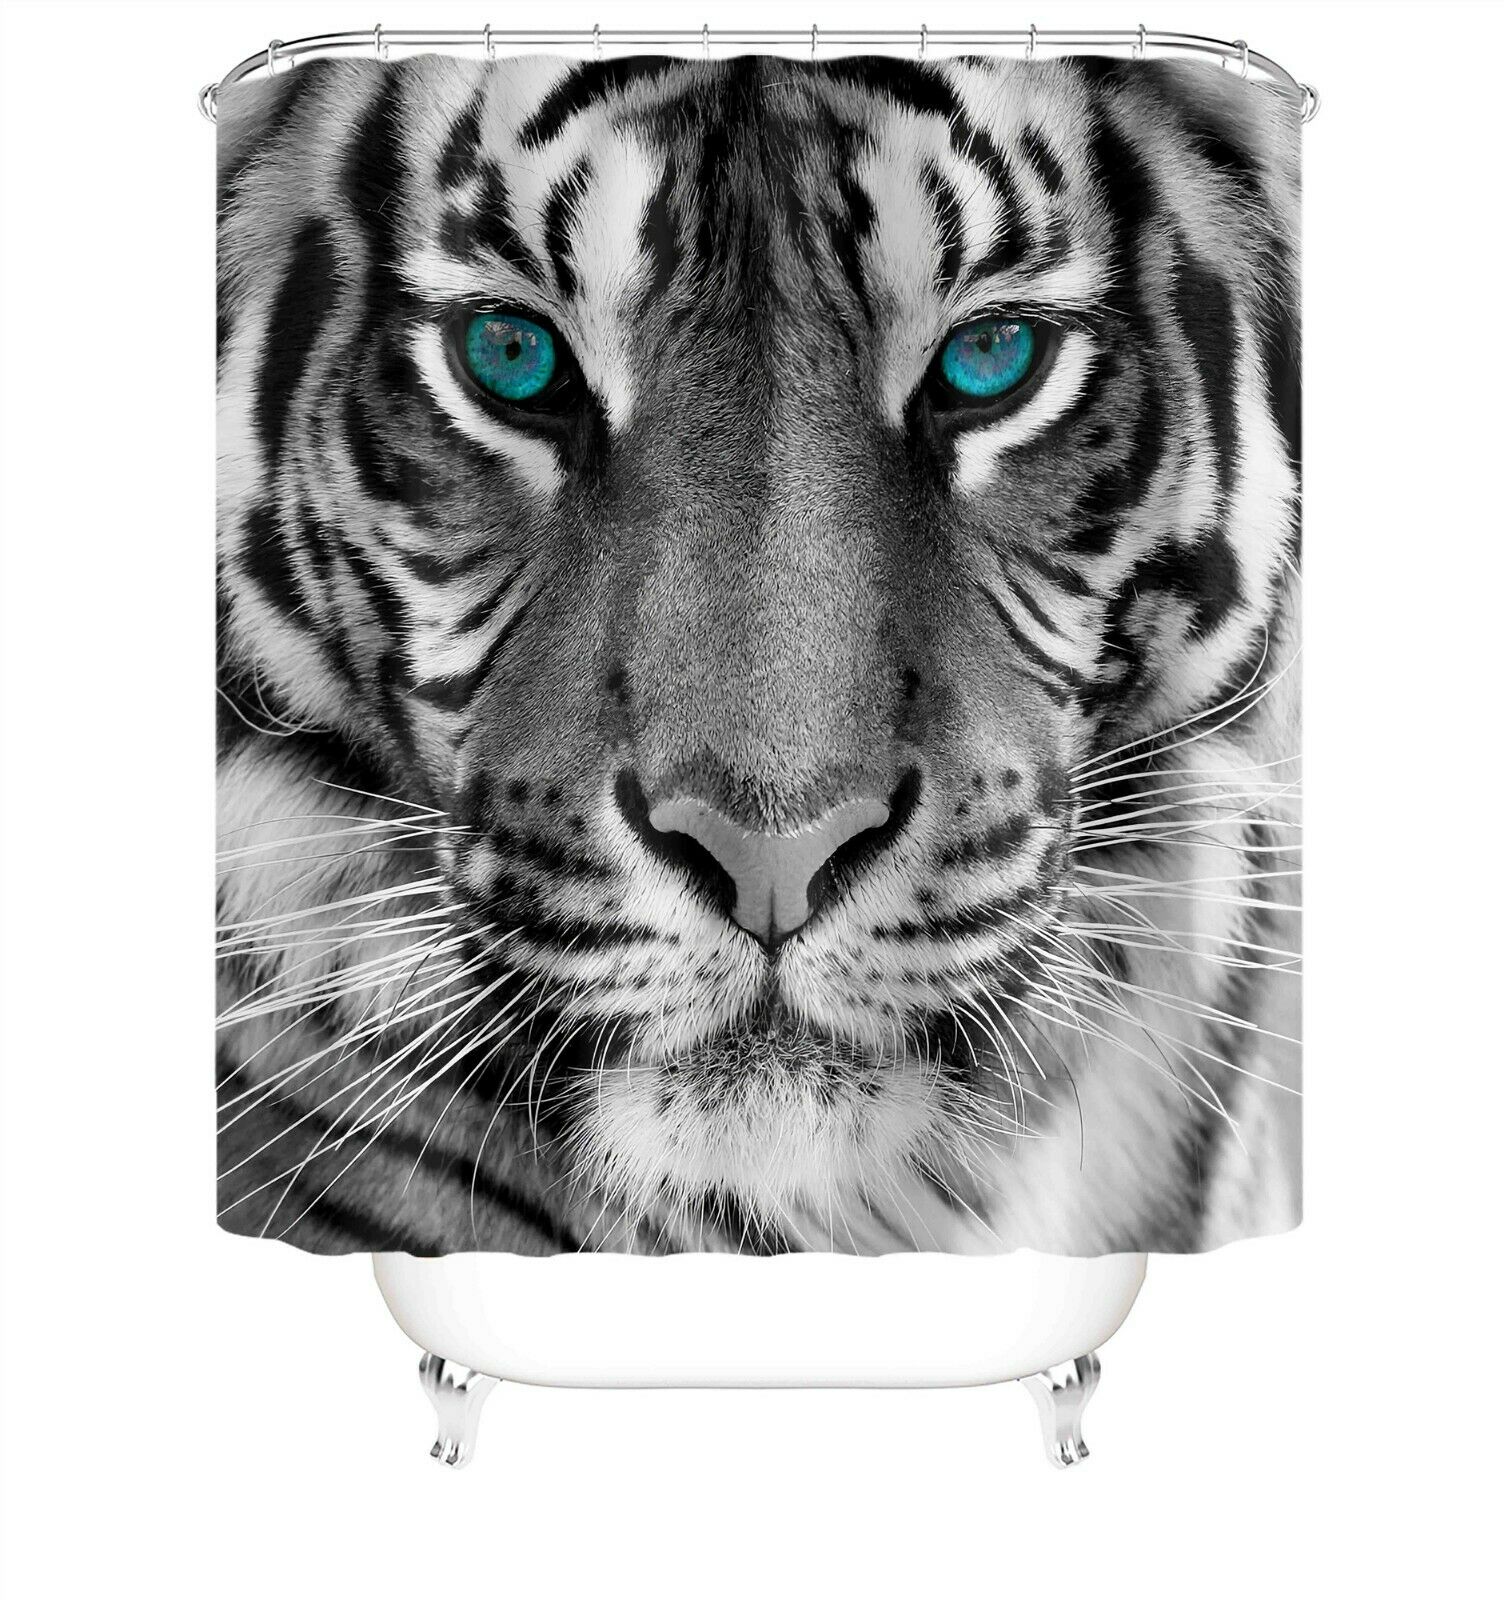 Tiger Shower Curtain Set Thick Bathroom Rugs Bath Mat Non-Slip Toilet Lid Cover-180×180cm Shower Curtain Only-Free Shipping at meselling99